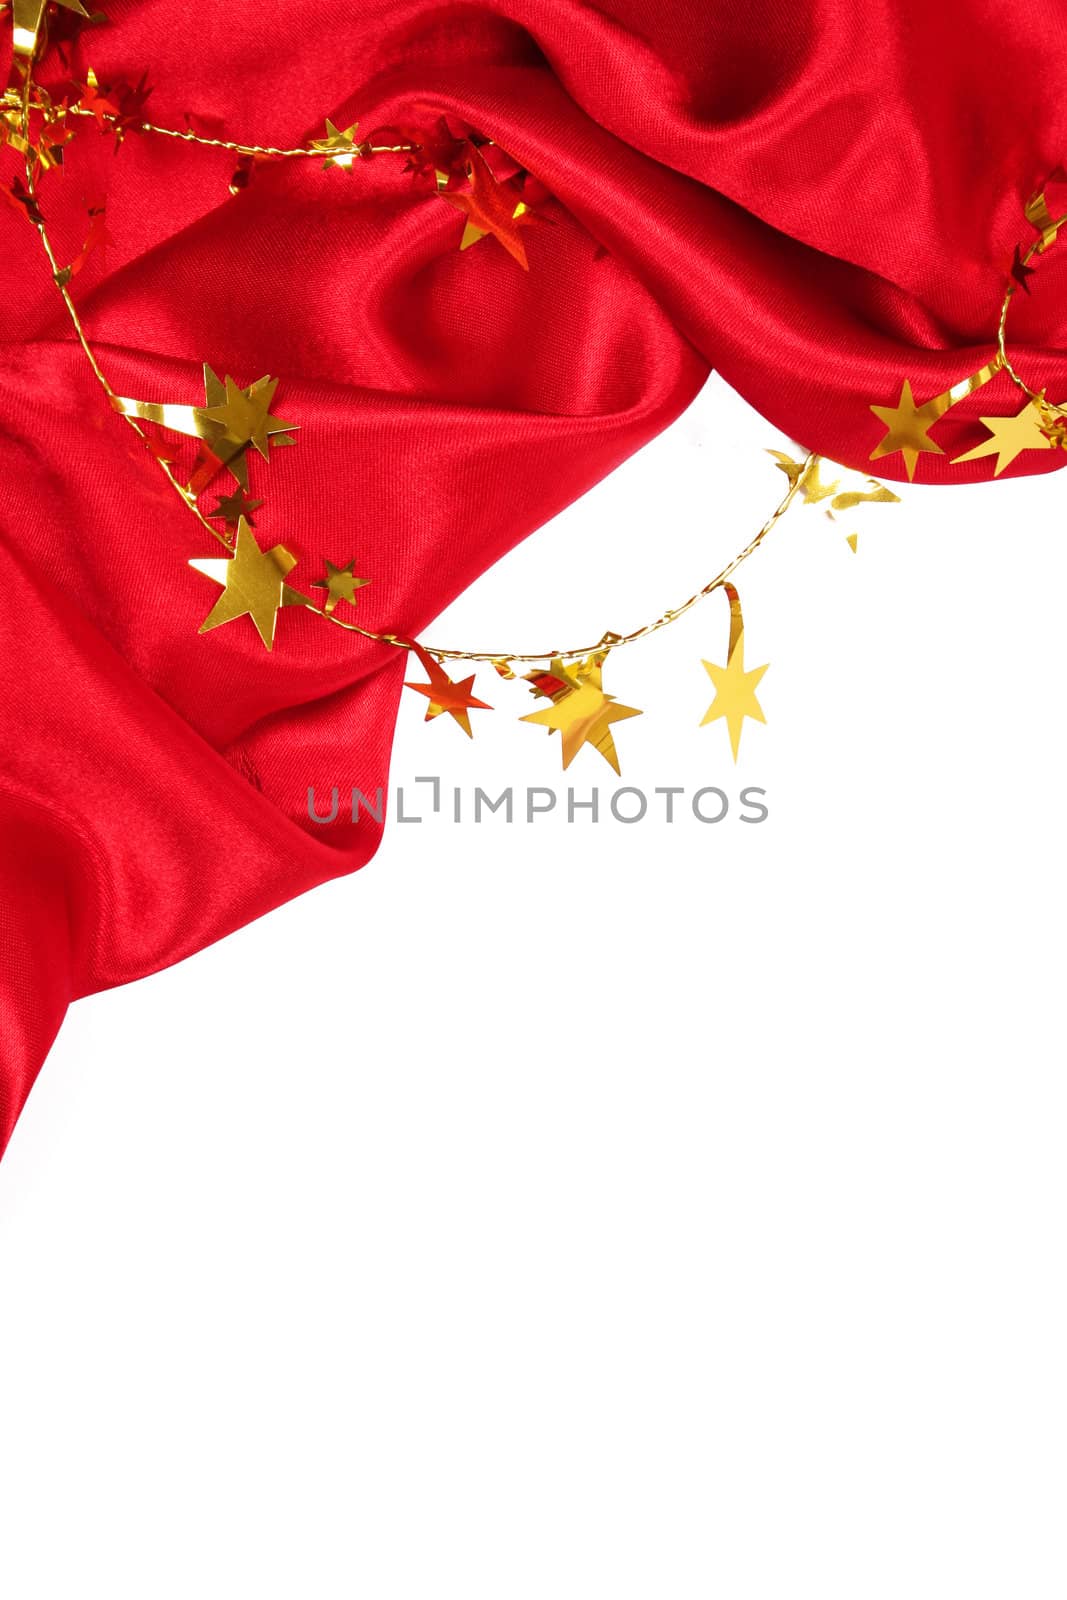 Red Silk with golden stars by oxanatravel